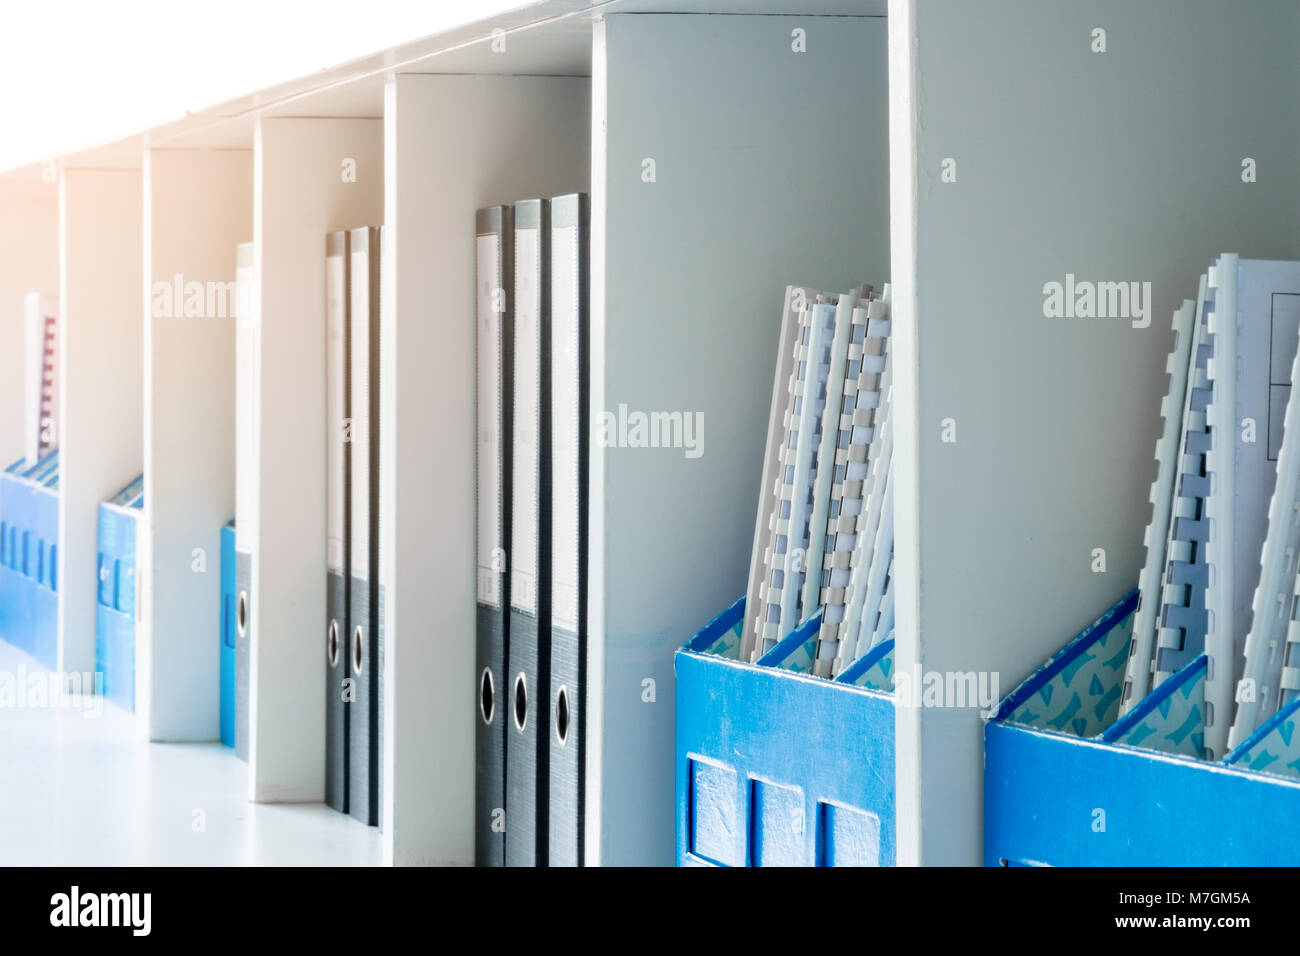 White office document cabinet, shelf and blue document boxes Stock Photo